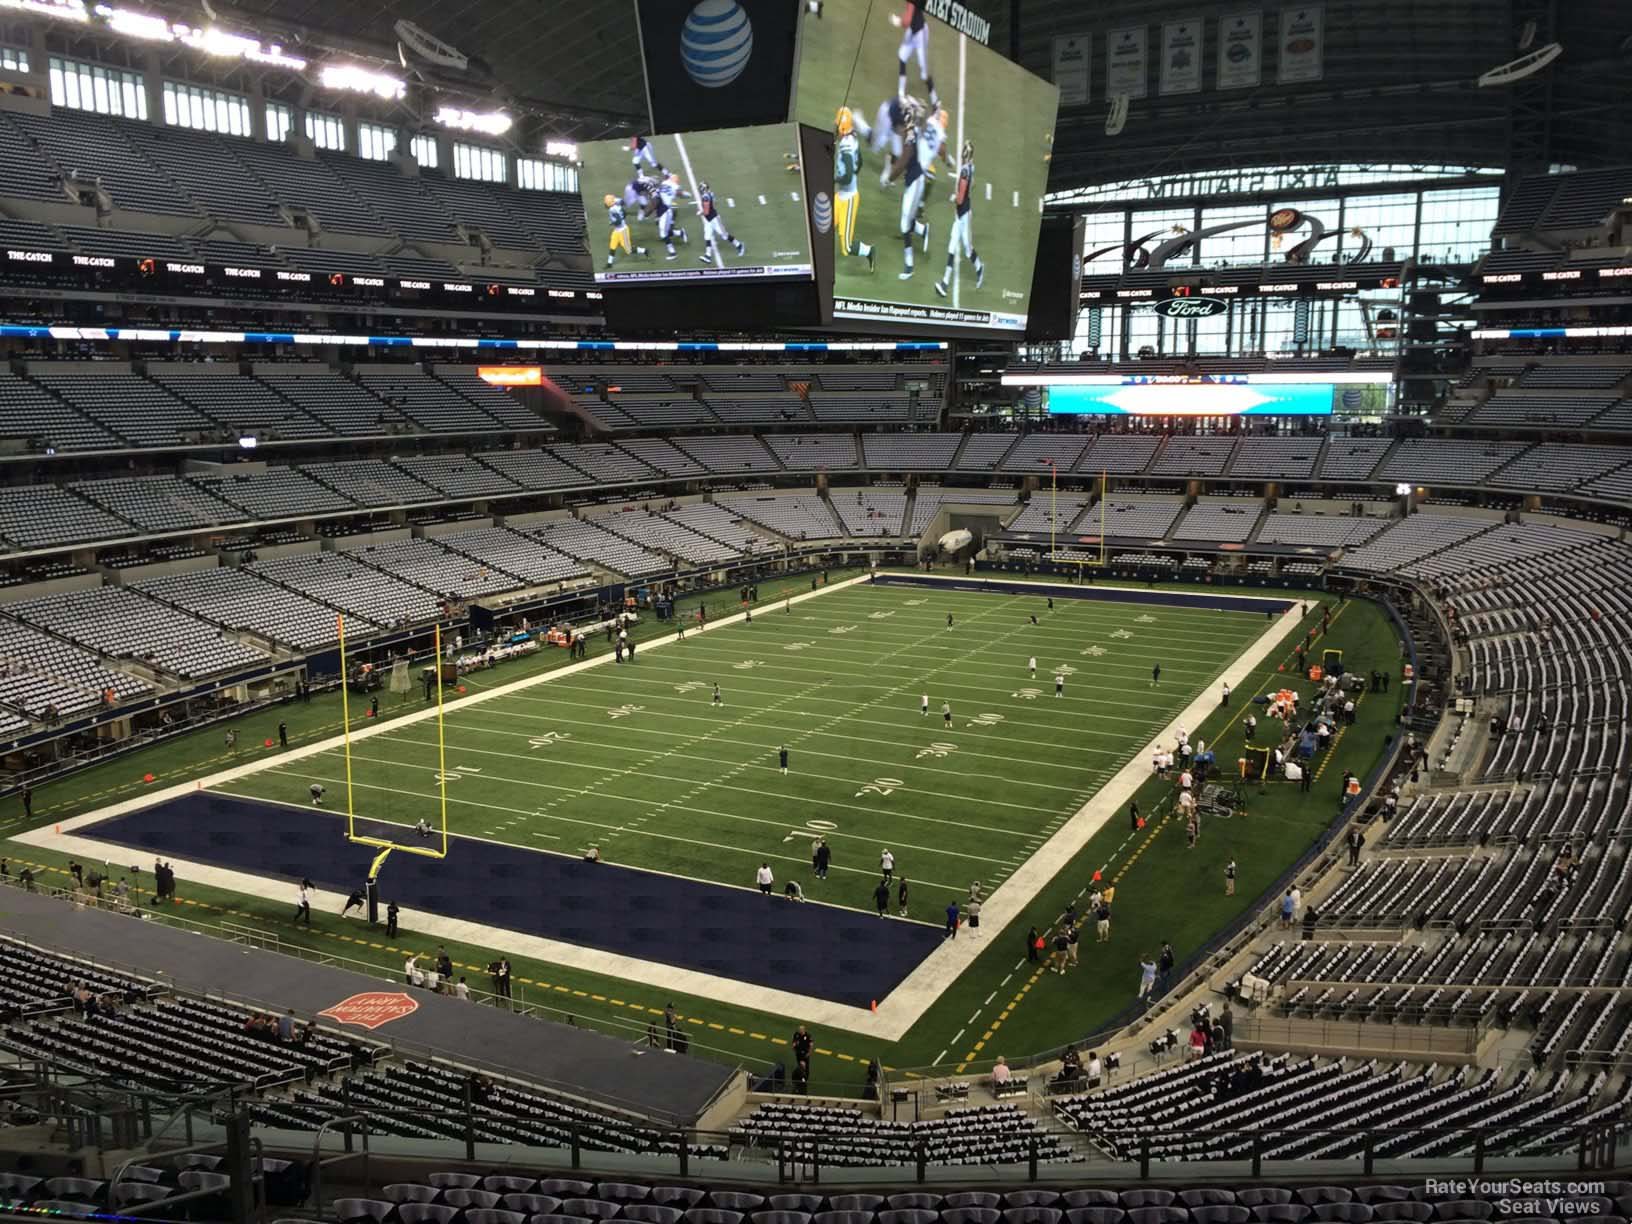 section 319, row 15 seat view  for football - at&t stadium (cowboys stadium)